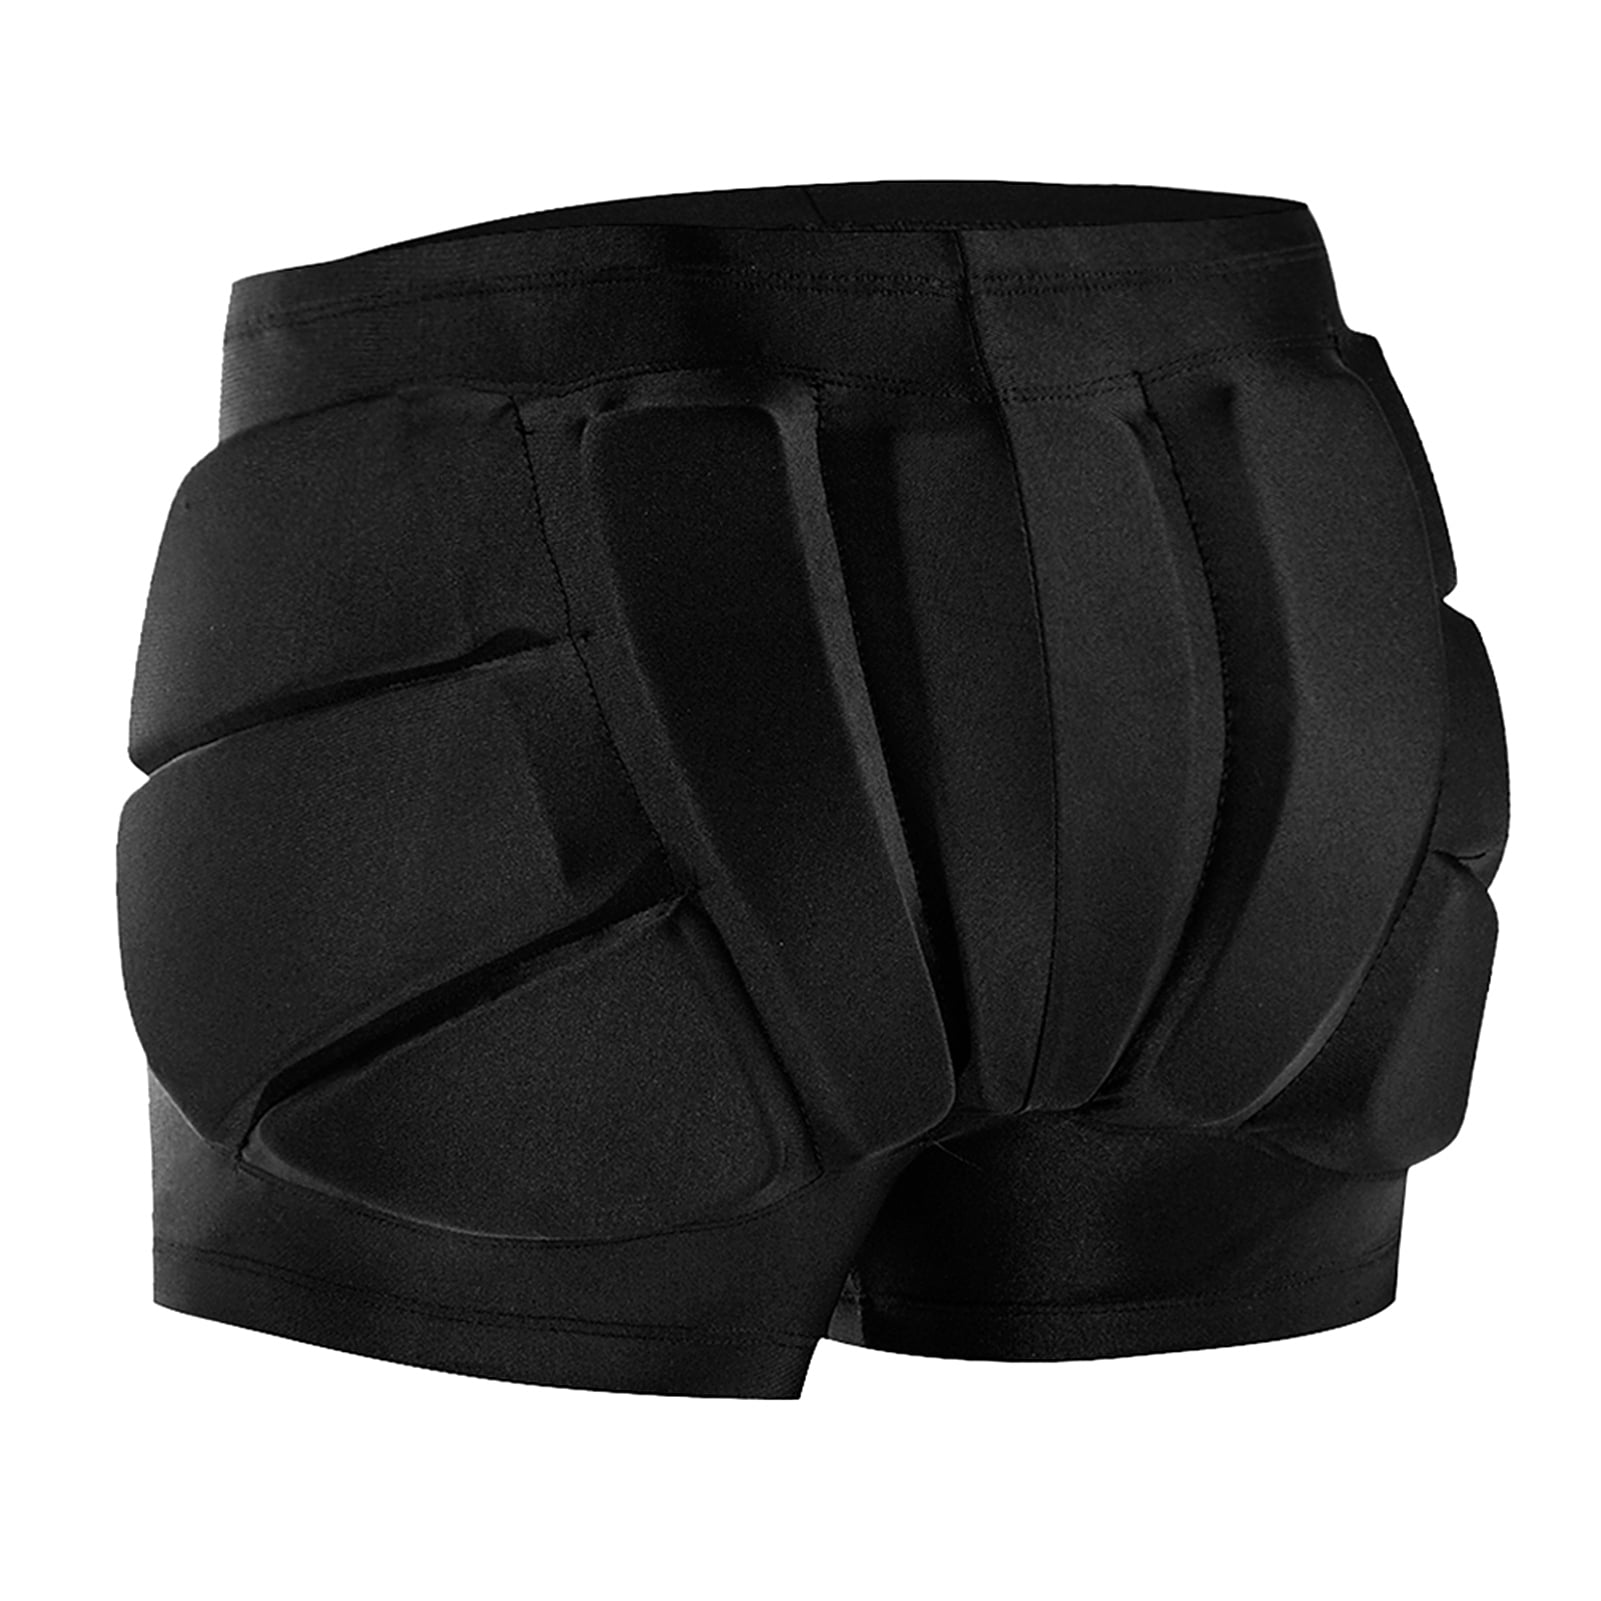 Protective Padded Shorts for Hip Butt Tailbone Snowboarding Skating ...